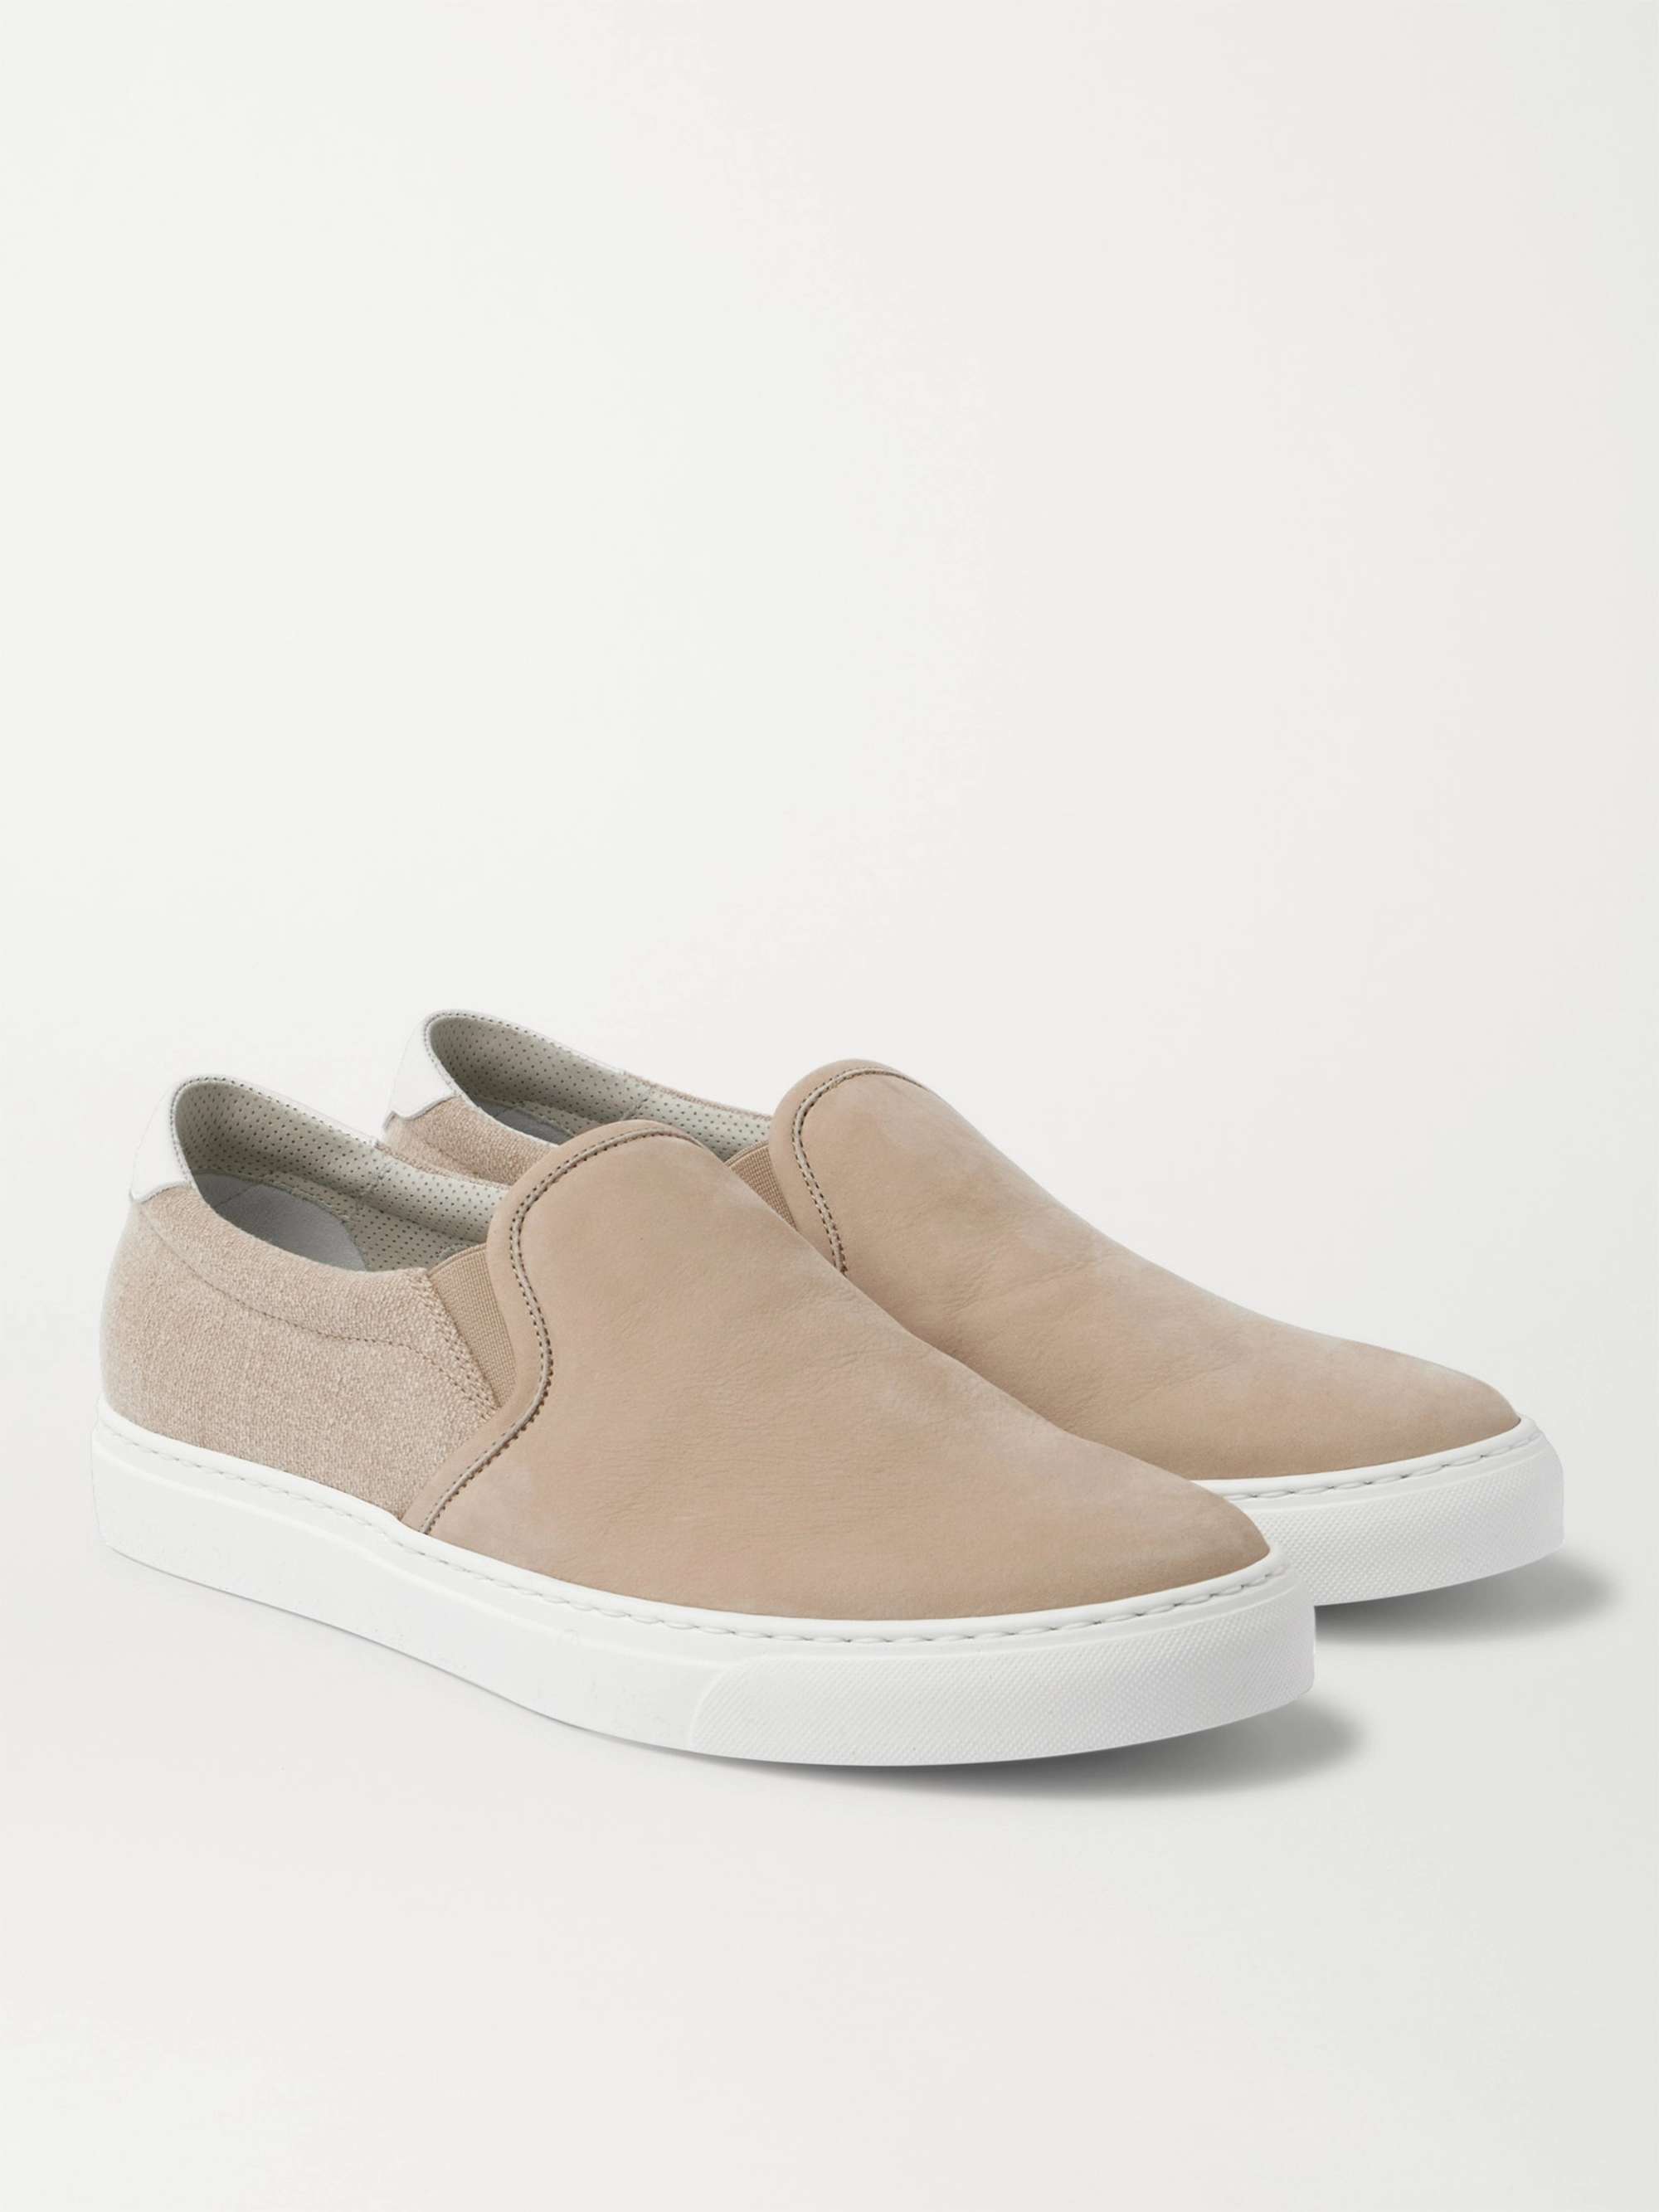 BRUNELLO CUCINELLI Leather-Trimmed Nubuck and Canvas Slip-On Sneakers ...